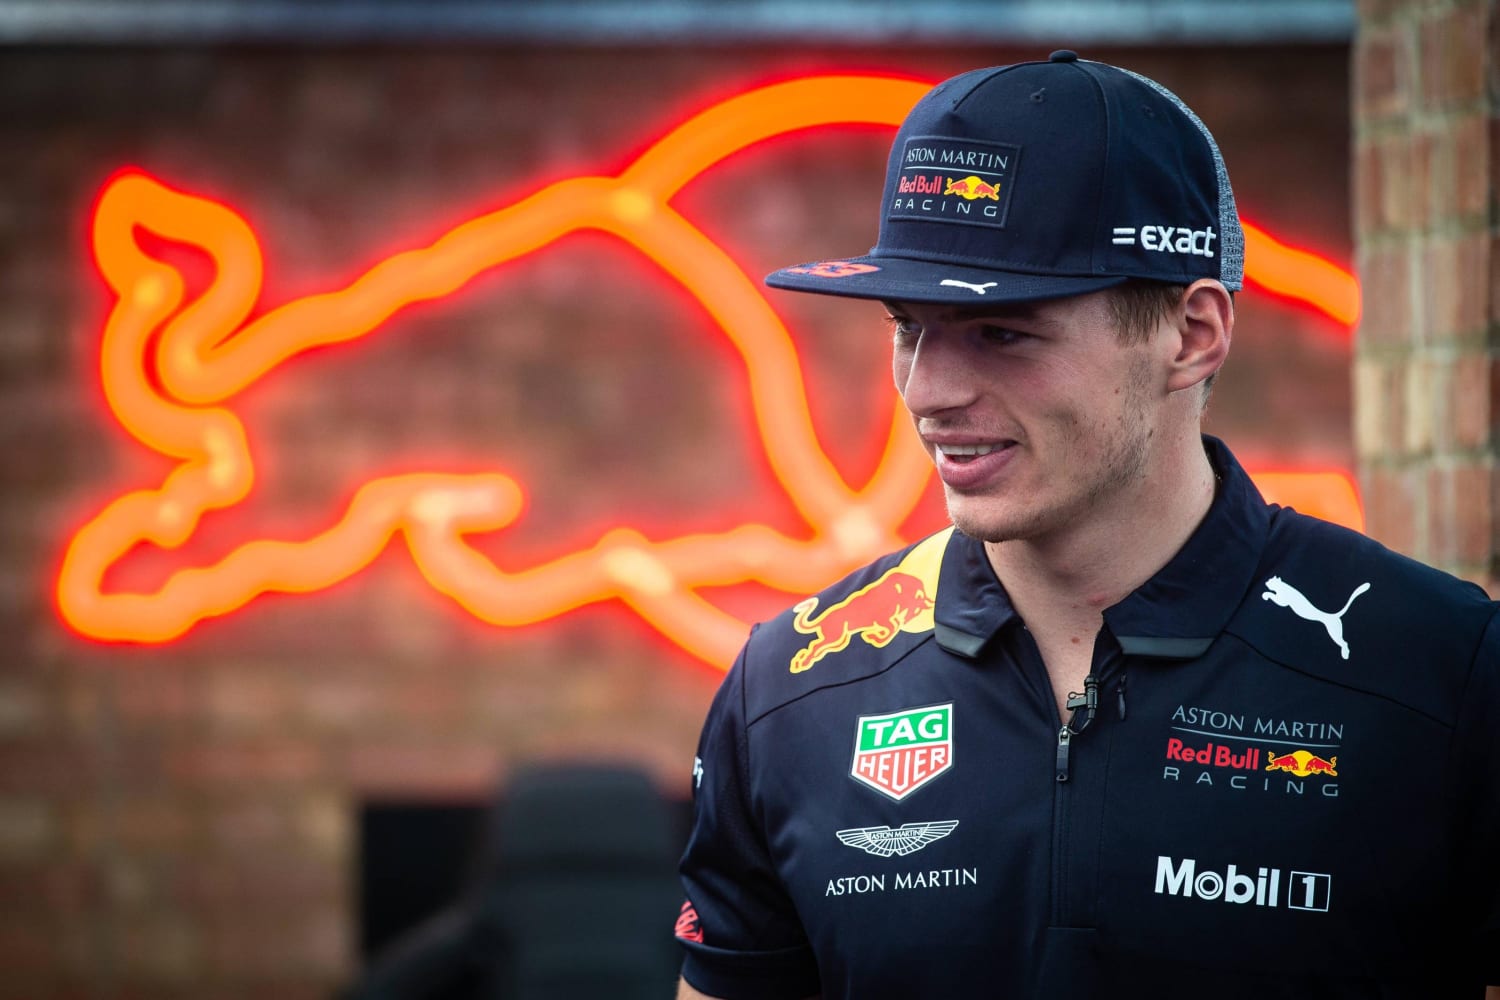 Eik Monopoly emulsie F1 2018 preview: Max Verstappen hits the track